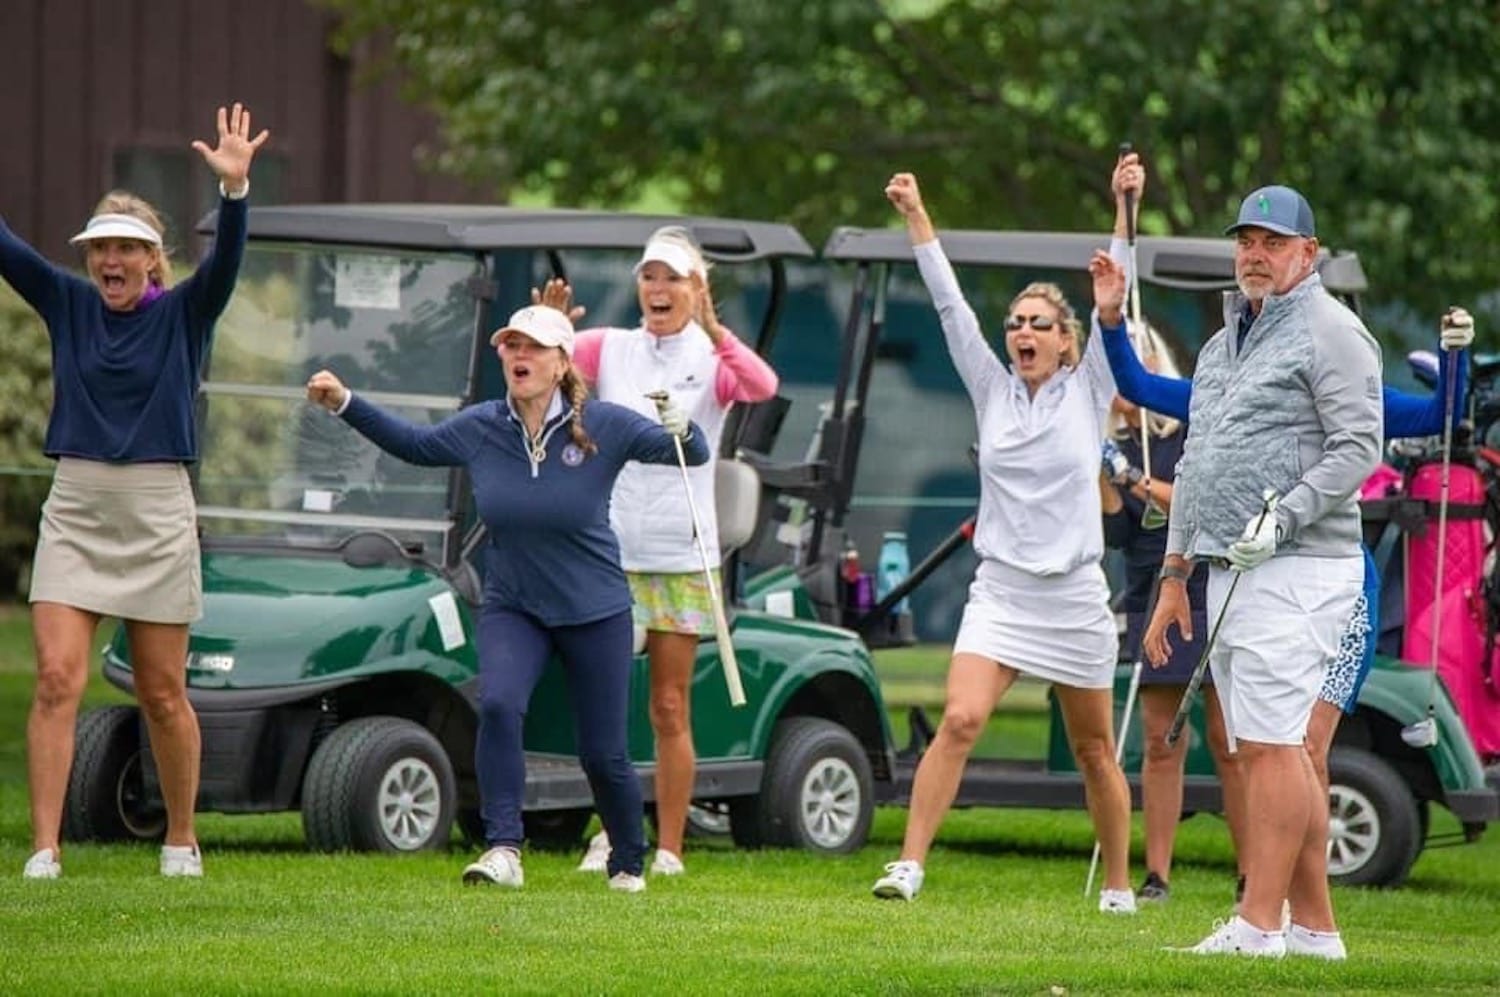 Stacy and others celebrating an amazing shot, hit by Darren Clarke at the 2021 Sanford International Senior PGA Tournament